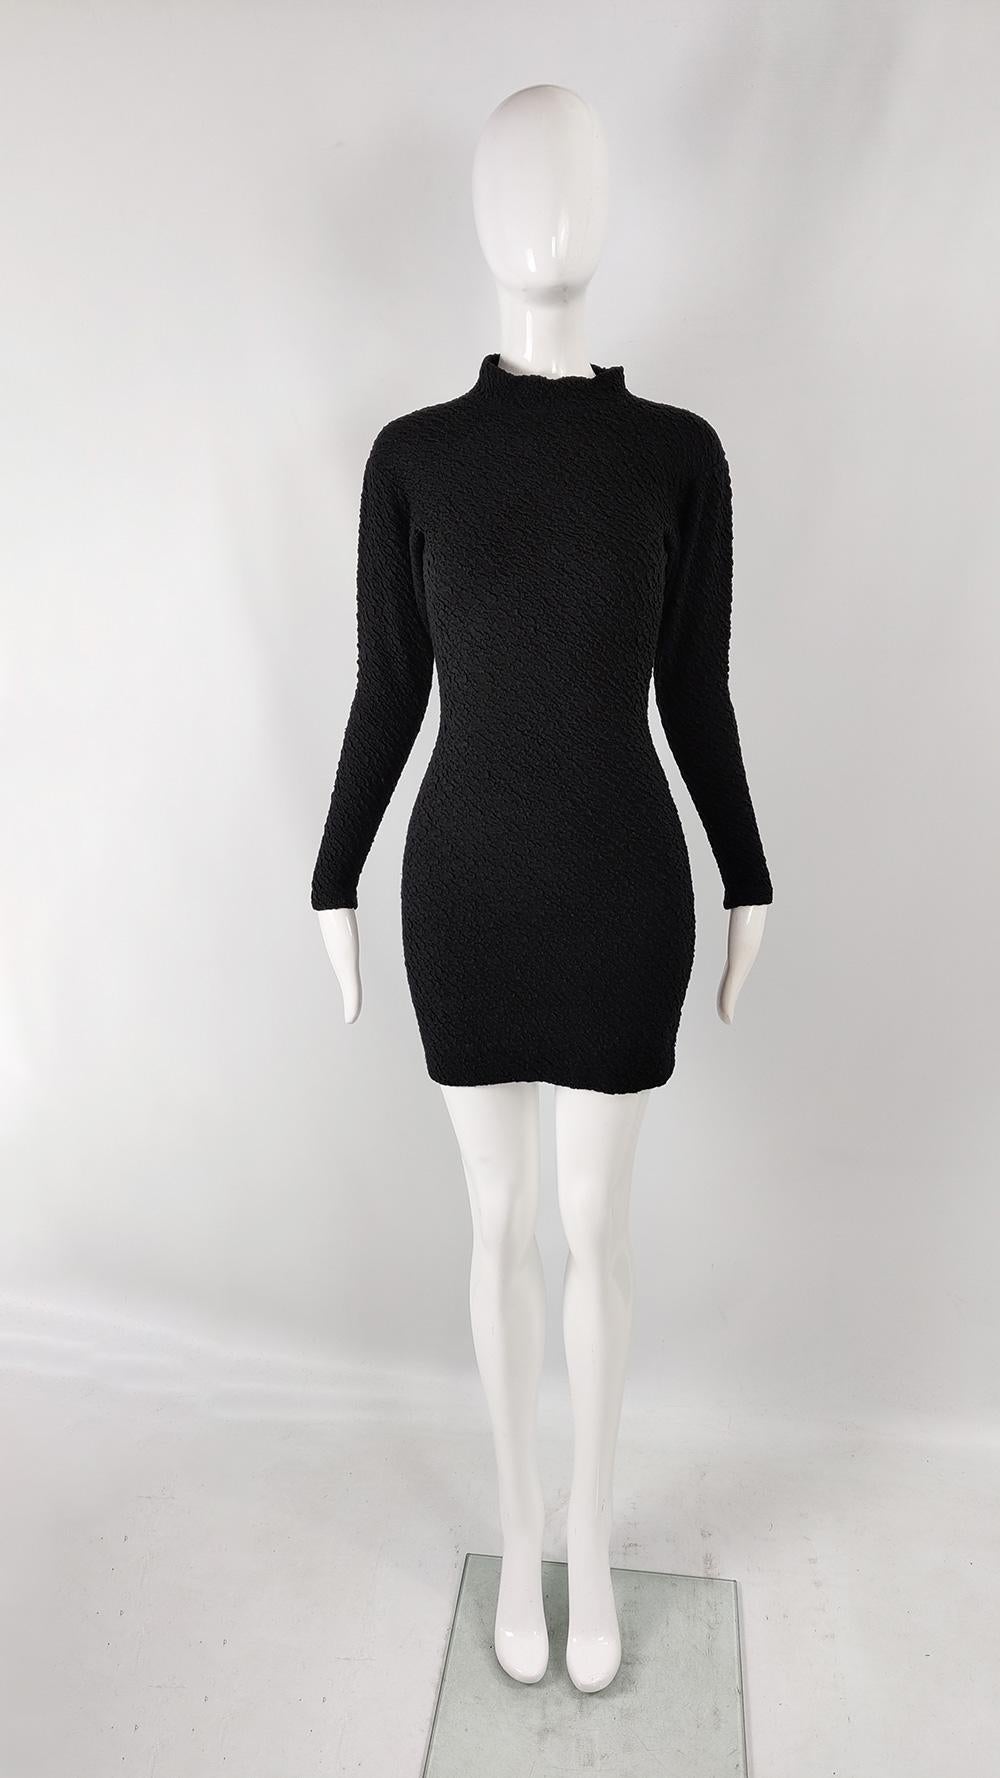 A sexy and fun vintage womens party dress from the 80s by luxury Italian fashion house, Fiorucci. Fiorucci were known for their fun designs in bold or experimental fabrics and this dress is a great example of this. Made in Italy from a black body